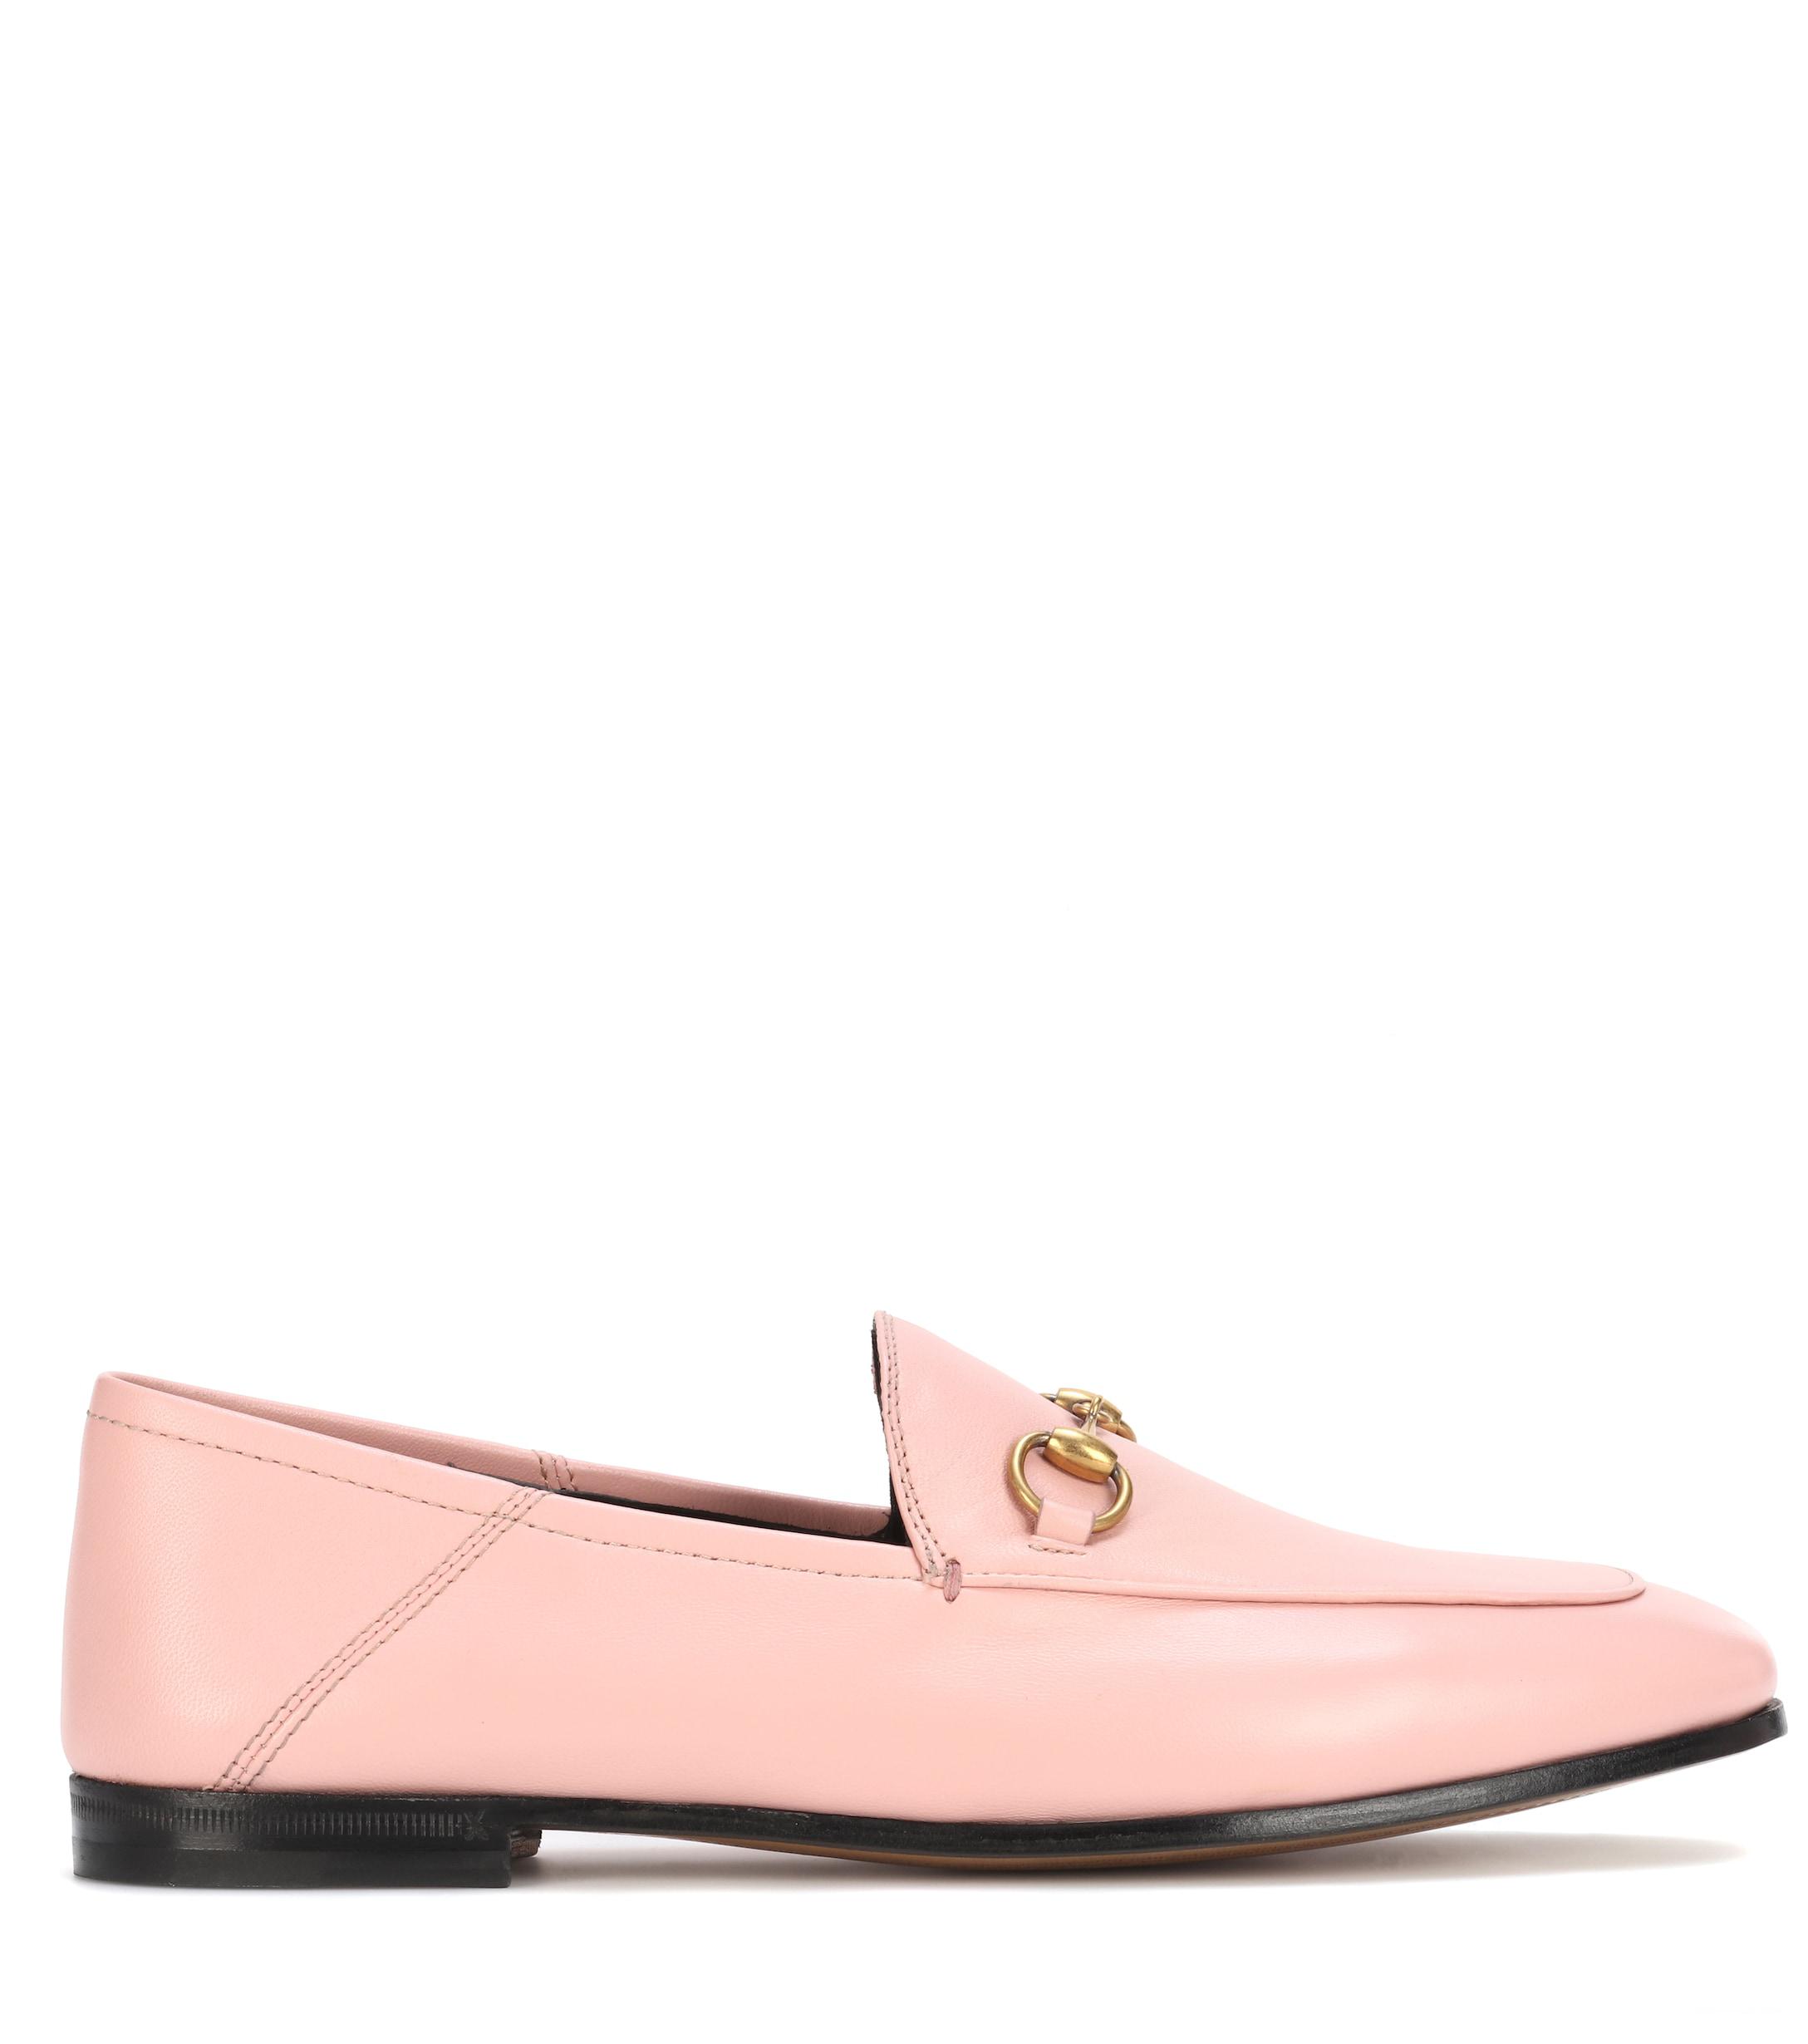 Gucci Horsebit Leather Loafers in Pink - Lyst